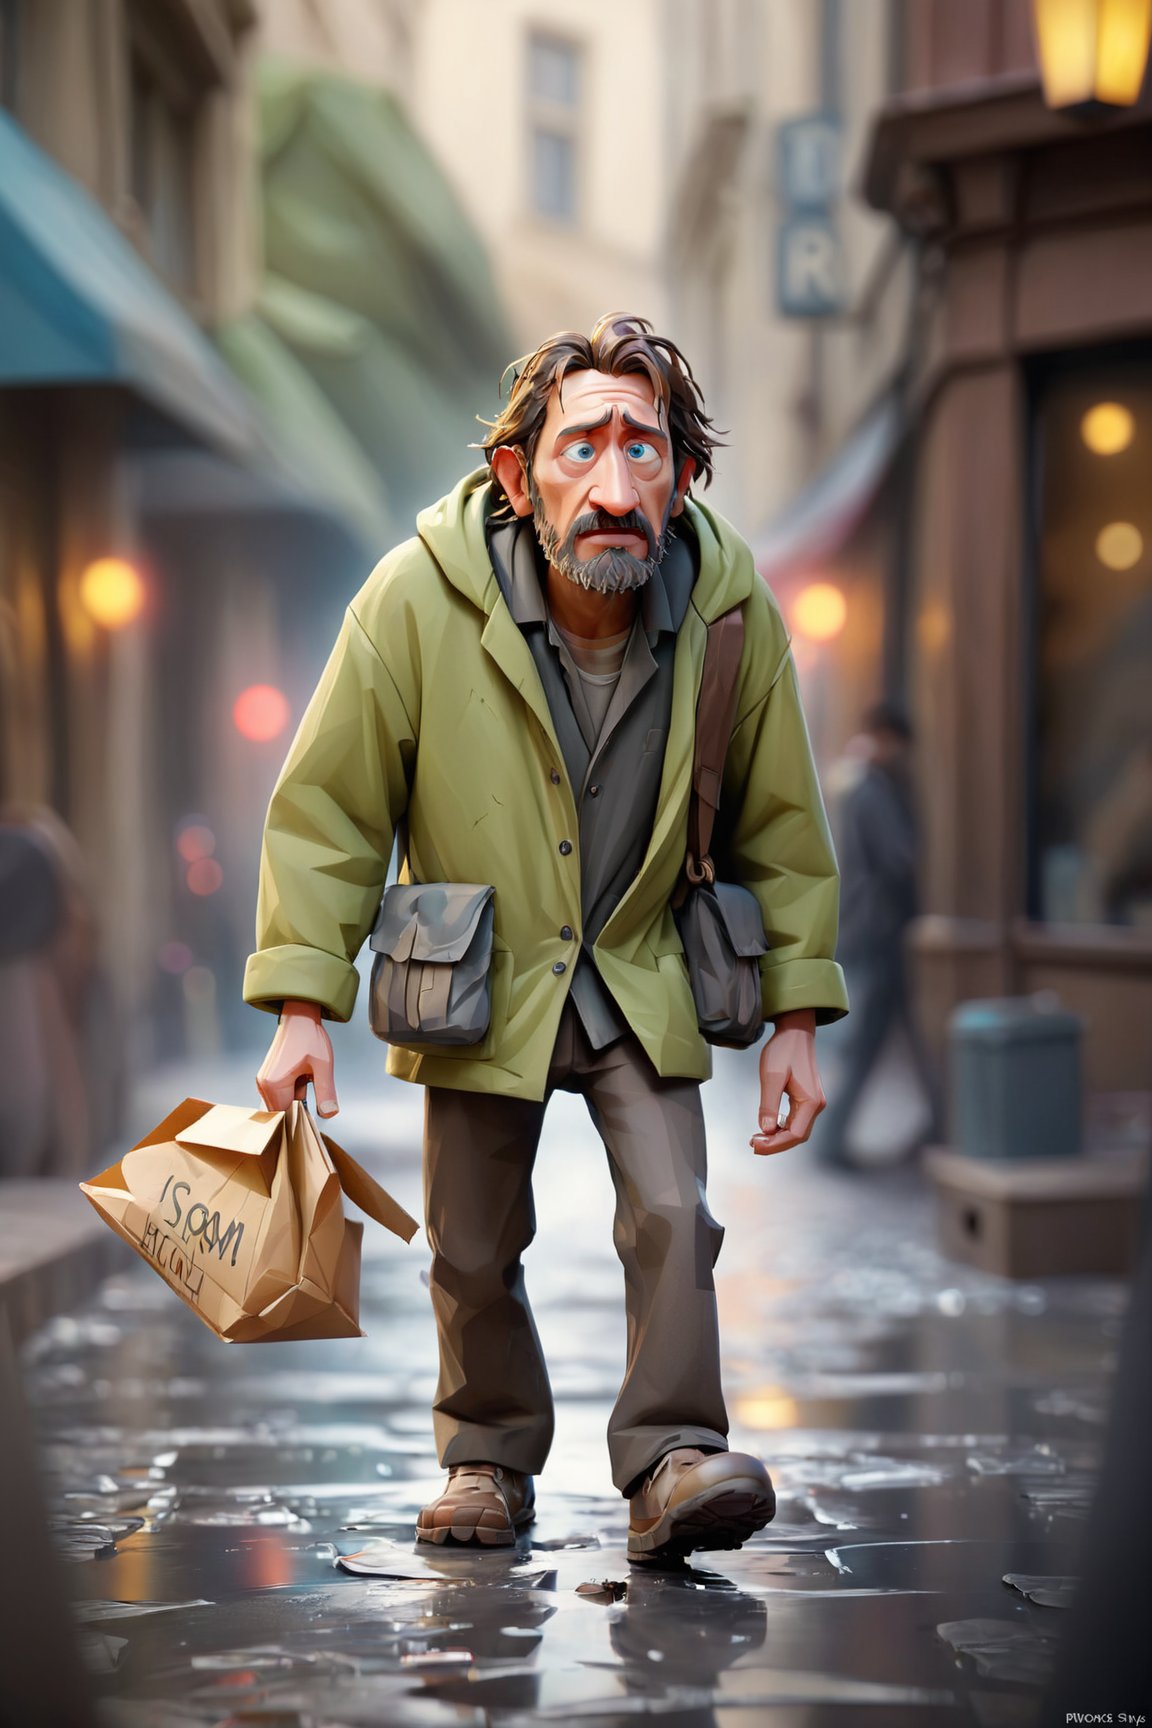 Imagine a bacterium playing the role of a homeless man, walking very sad, banished look down, pixar style image.